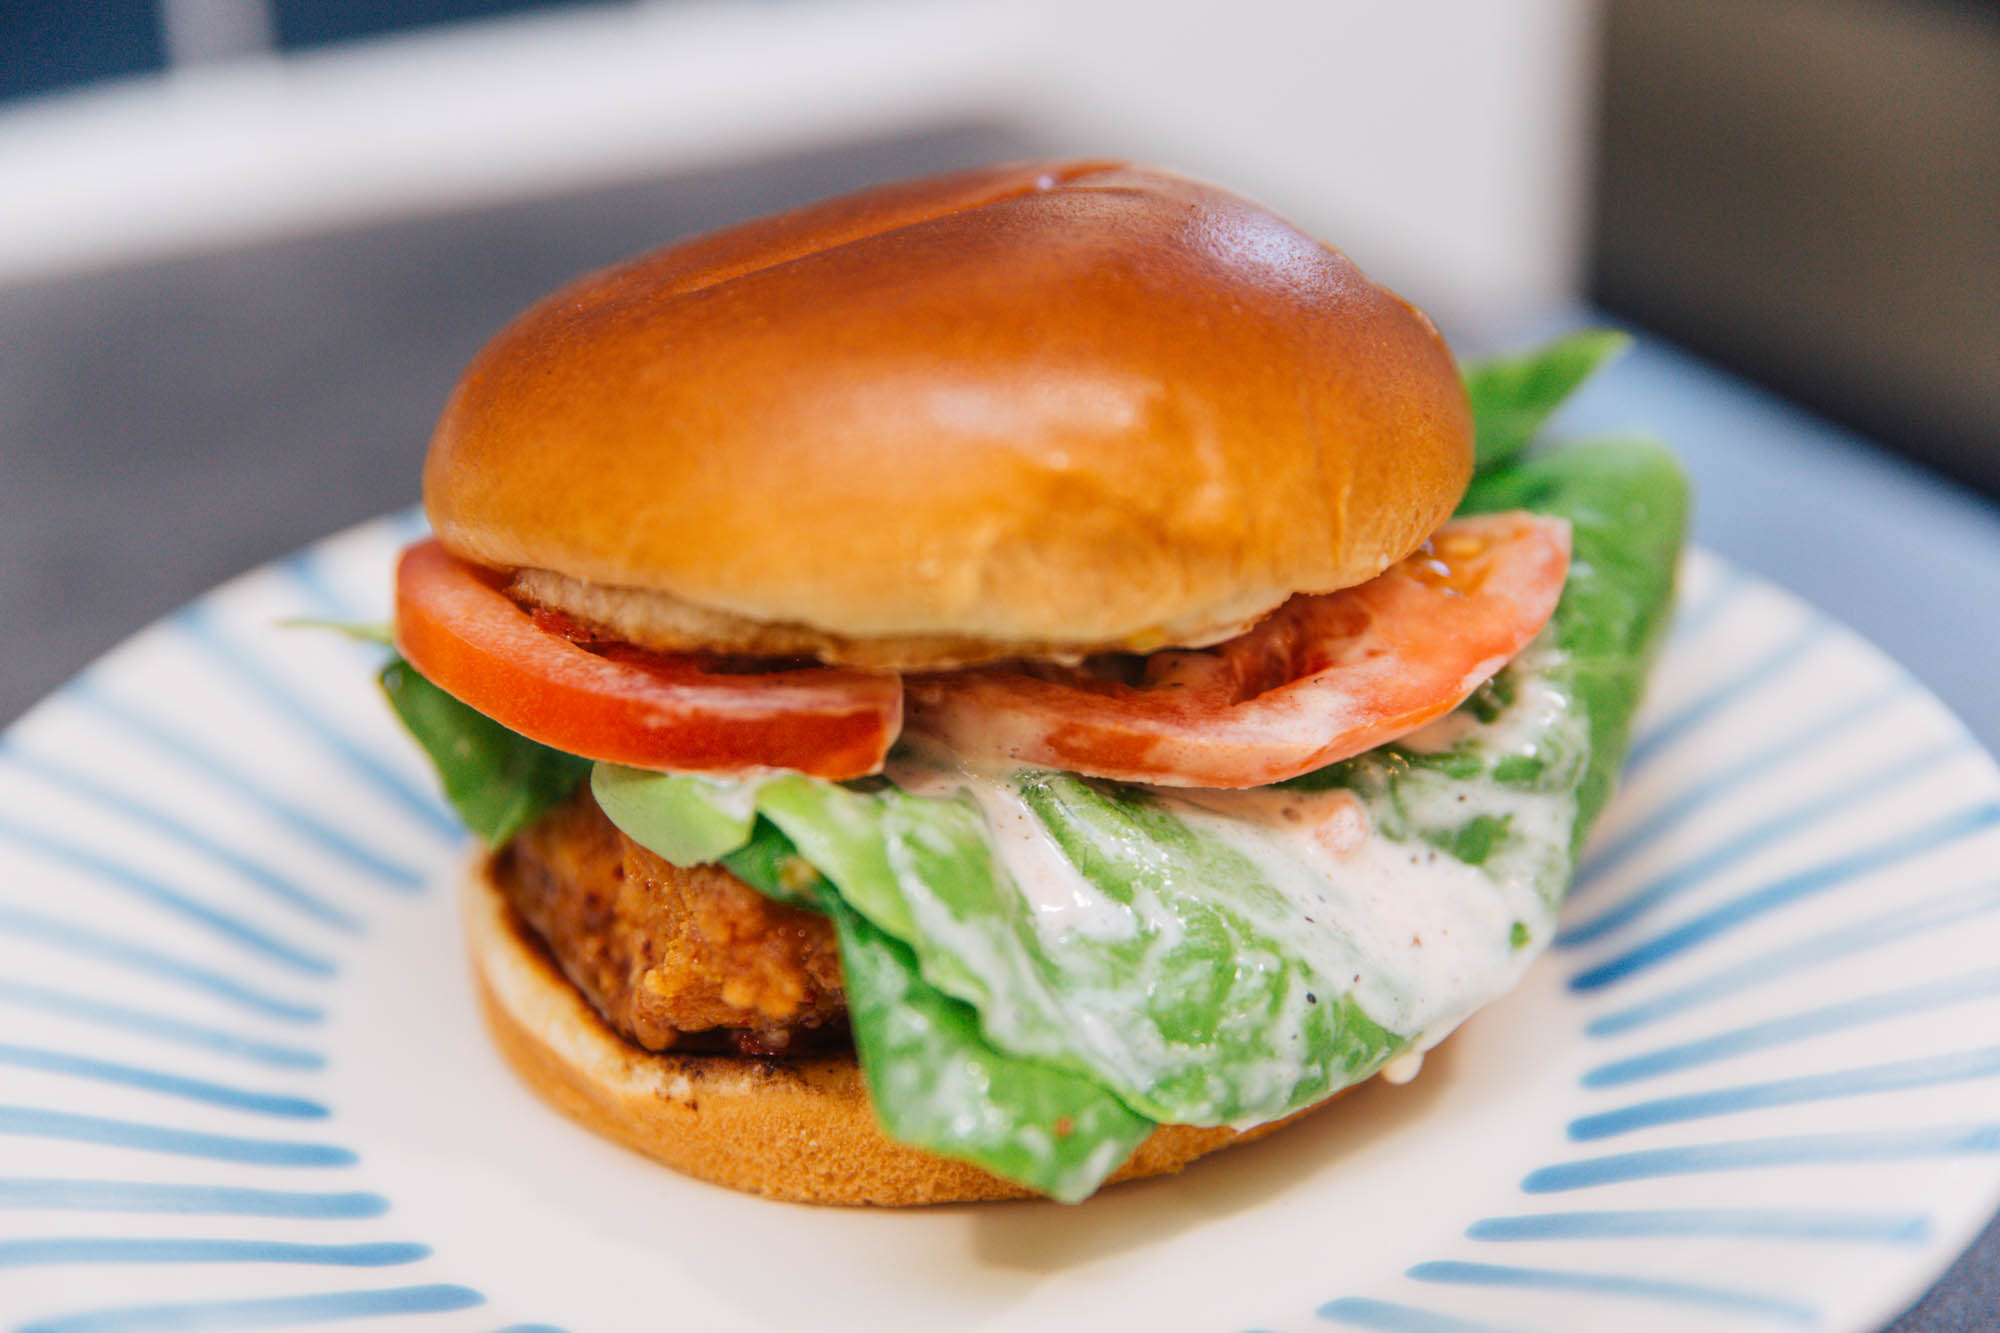 Fried chicken sandwich with lettuce and tomato